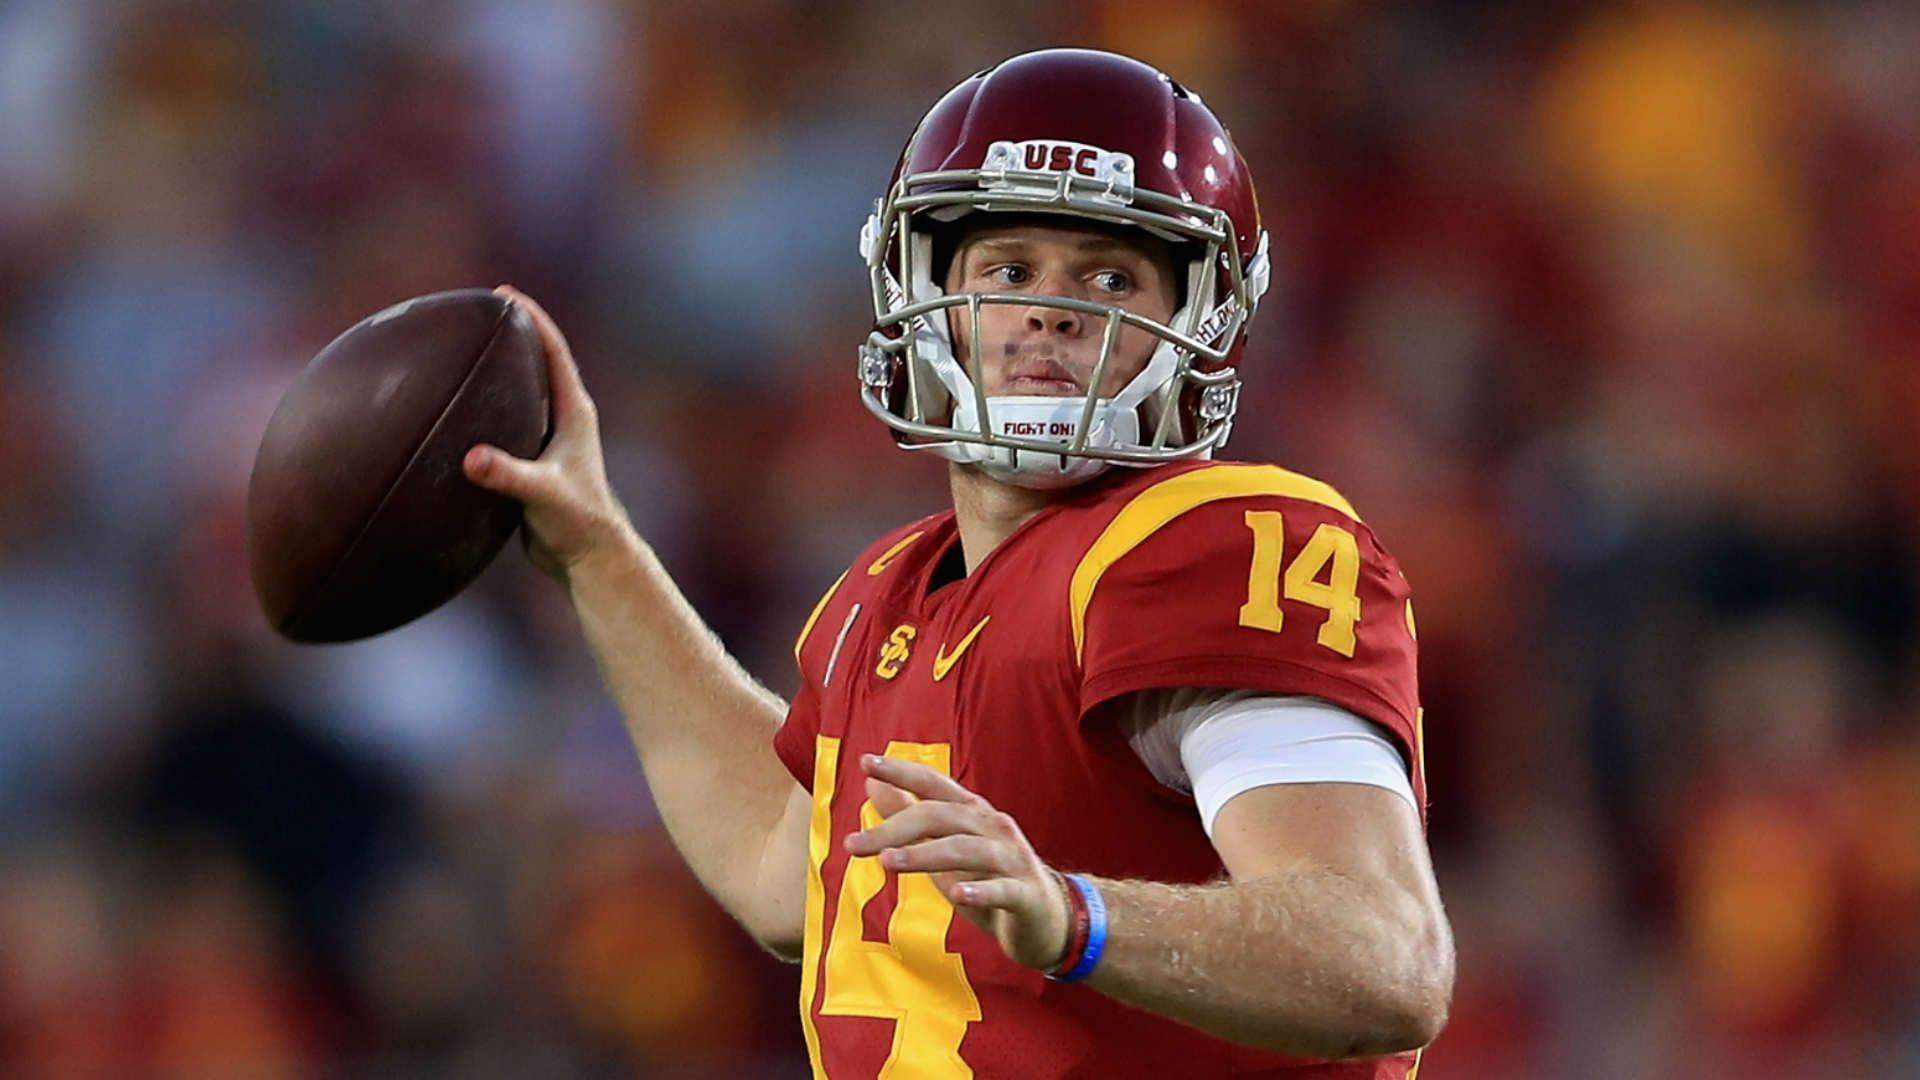 Sam Darnold may return to USC if Browns have No. 1 pick in 2018